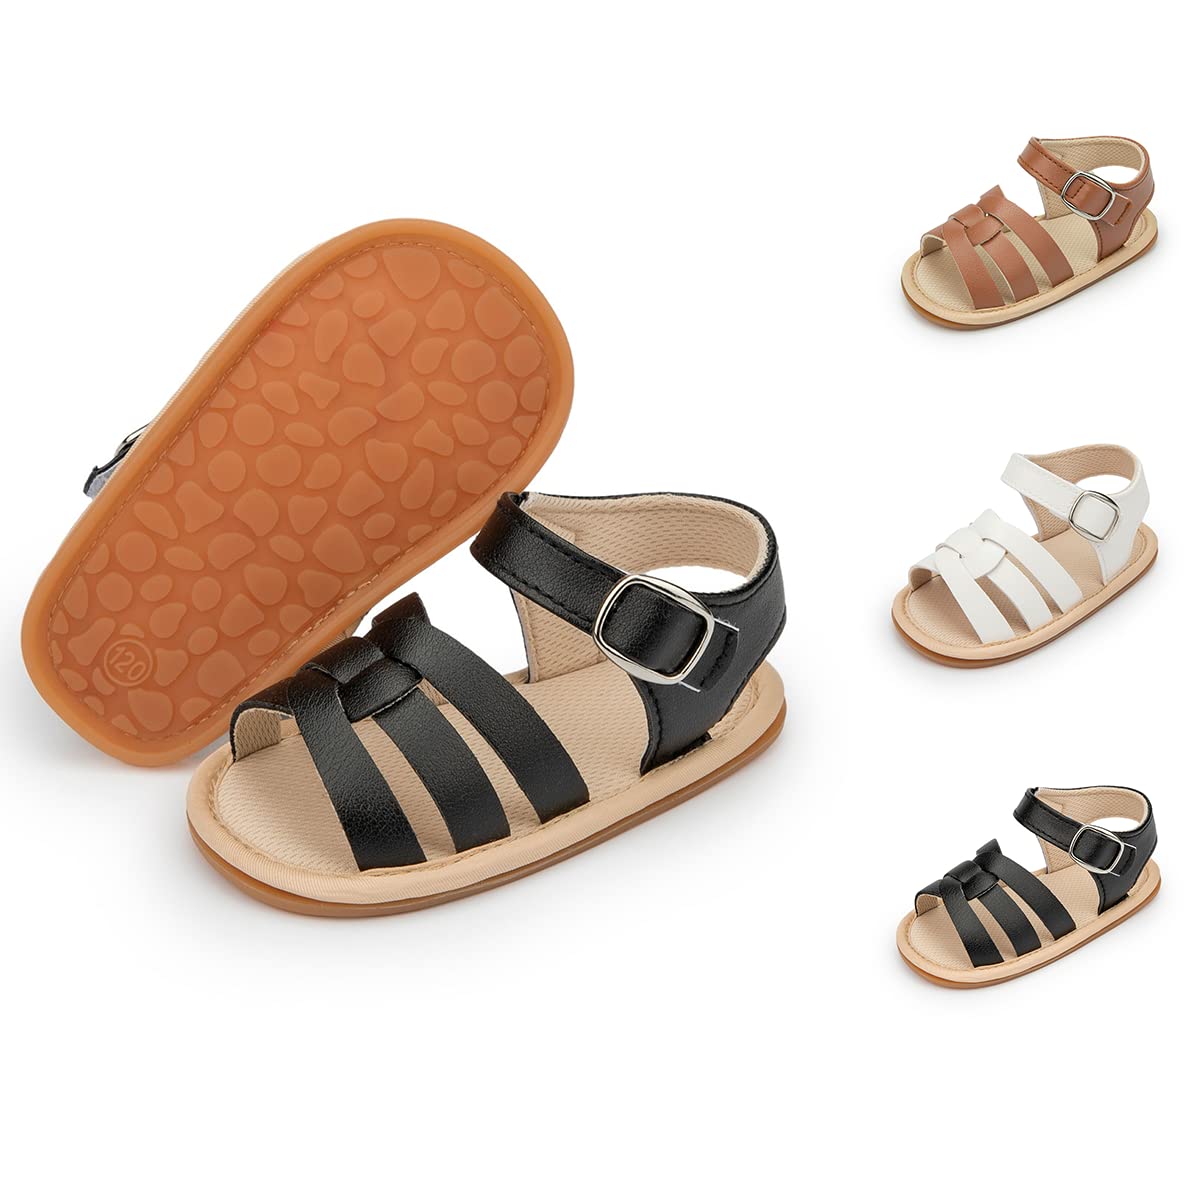 BOYS SANDALS KIDS TOUCH STRAP SUMMER BEACH HOLIDAY COMFORT HIKING SPORTS  SHOES | eBay